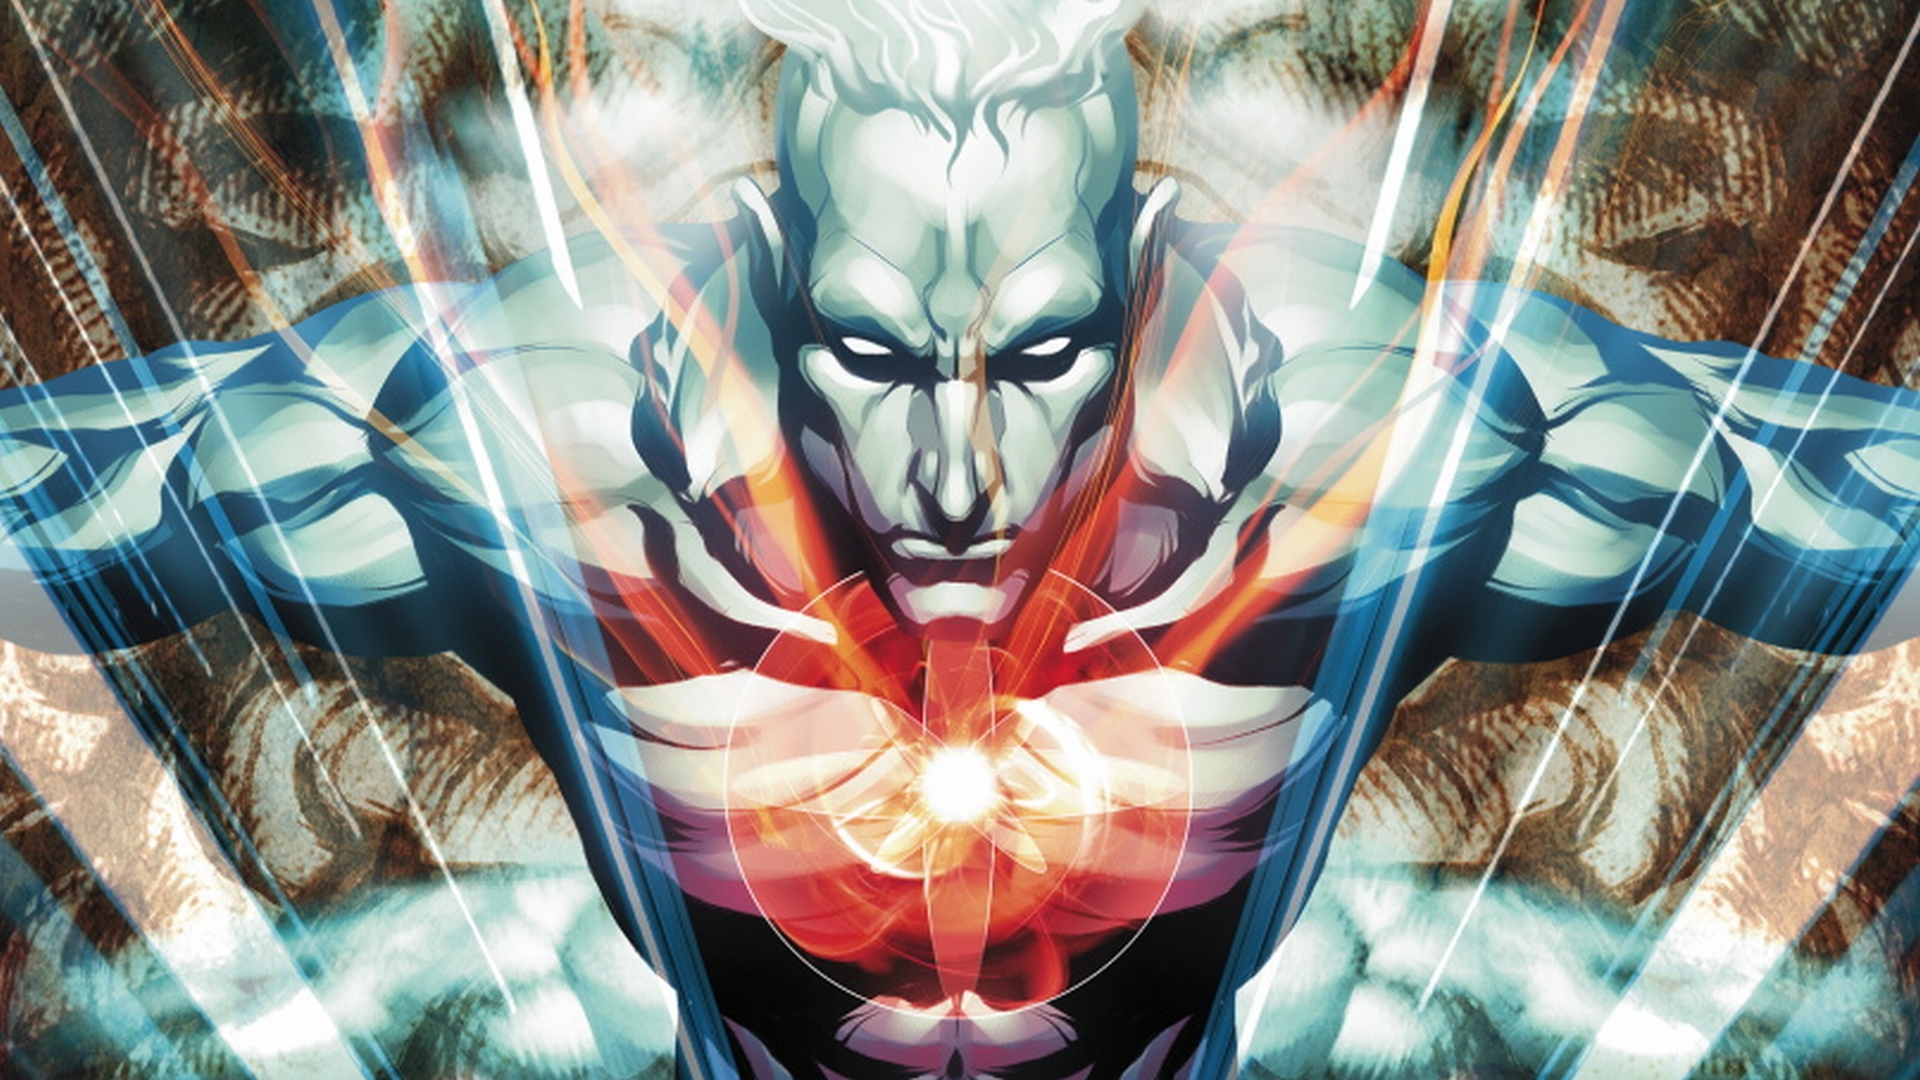 22 Captain Atom HD Wallpapers | Backgrounds - Wallpaper Abyss1920 x 1080